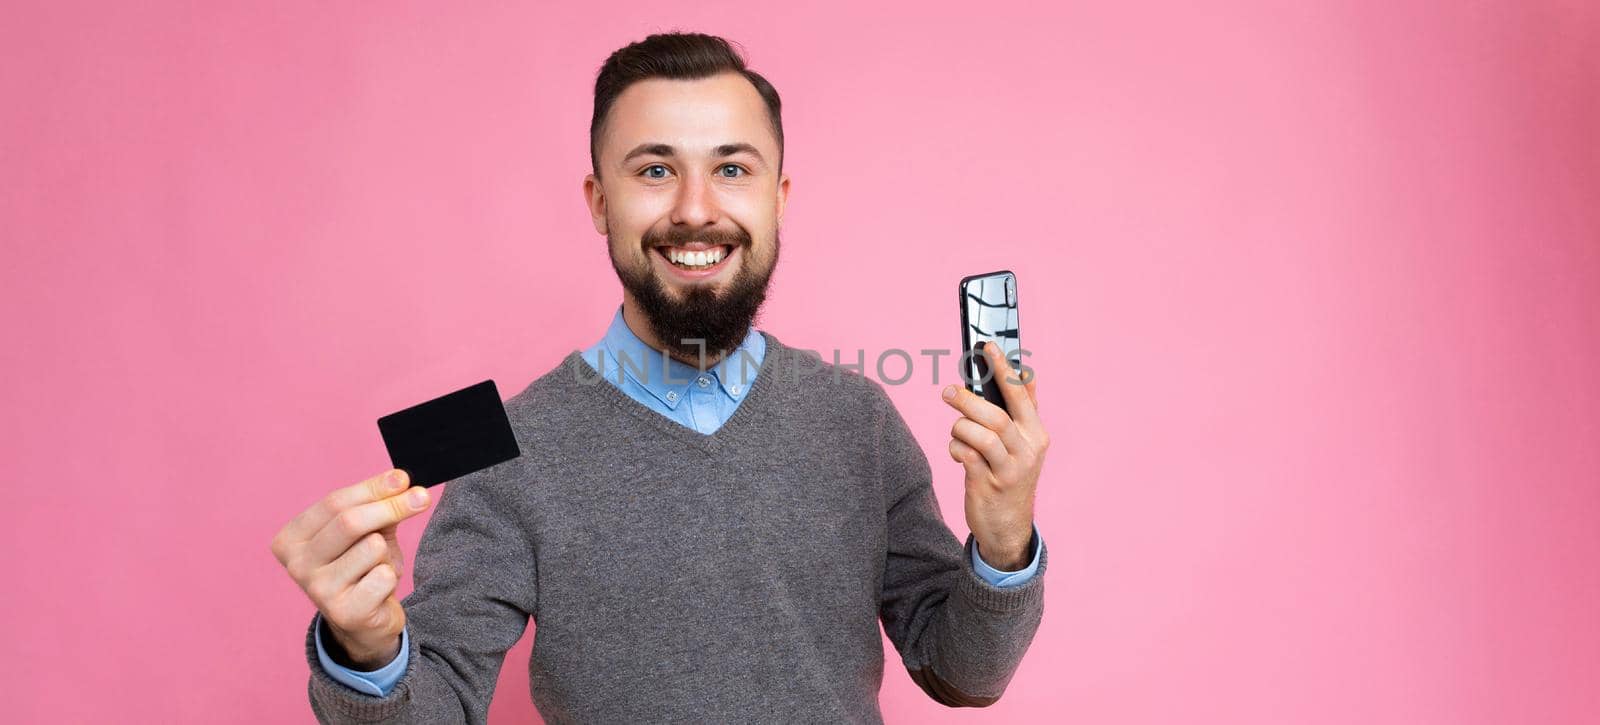 Panoramic photo shot of Handsome smiling brunette bearded young man wearing stylish grey sweater and blue shirt isolated over background wall holding credit card and mobile phone looking at camera.